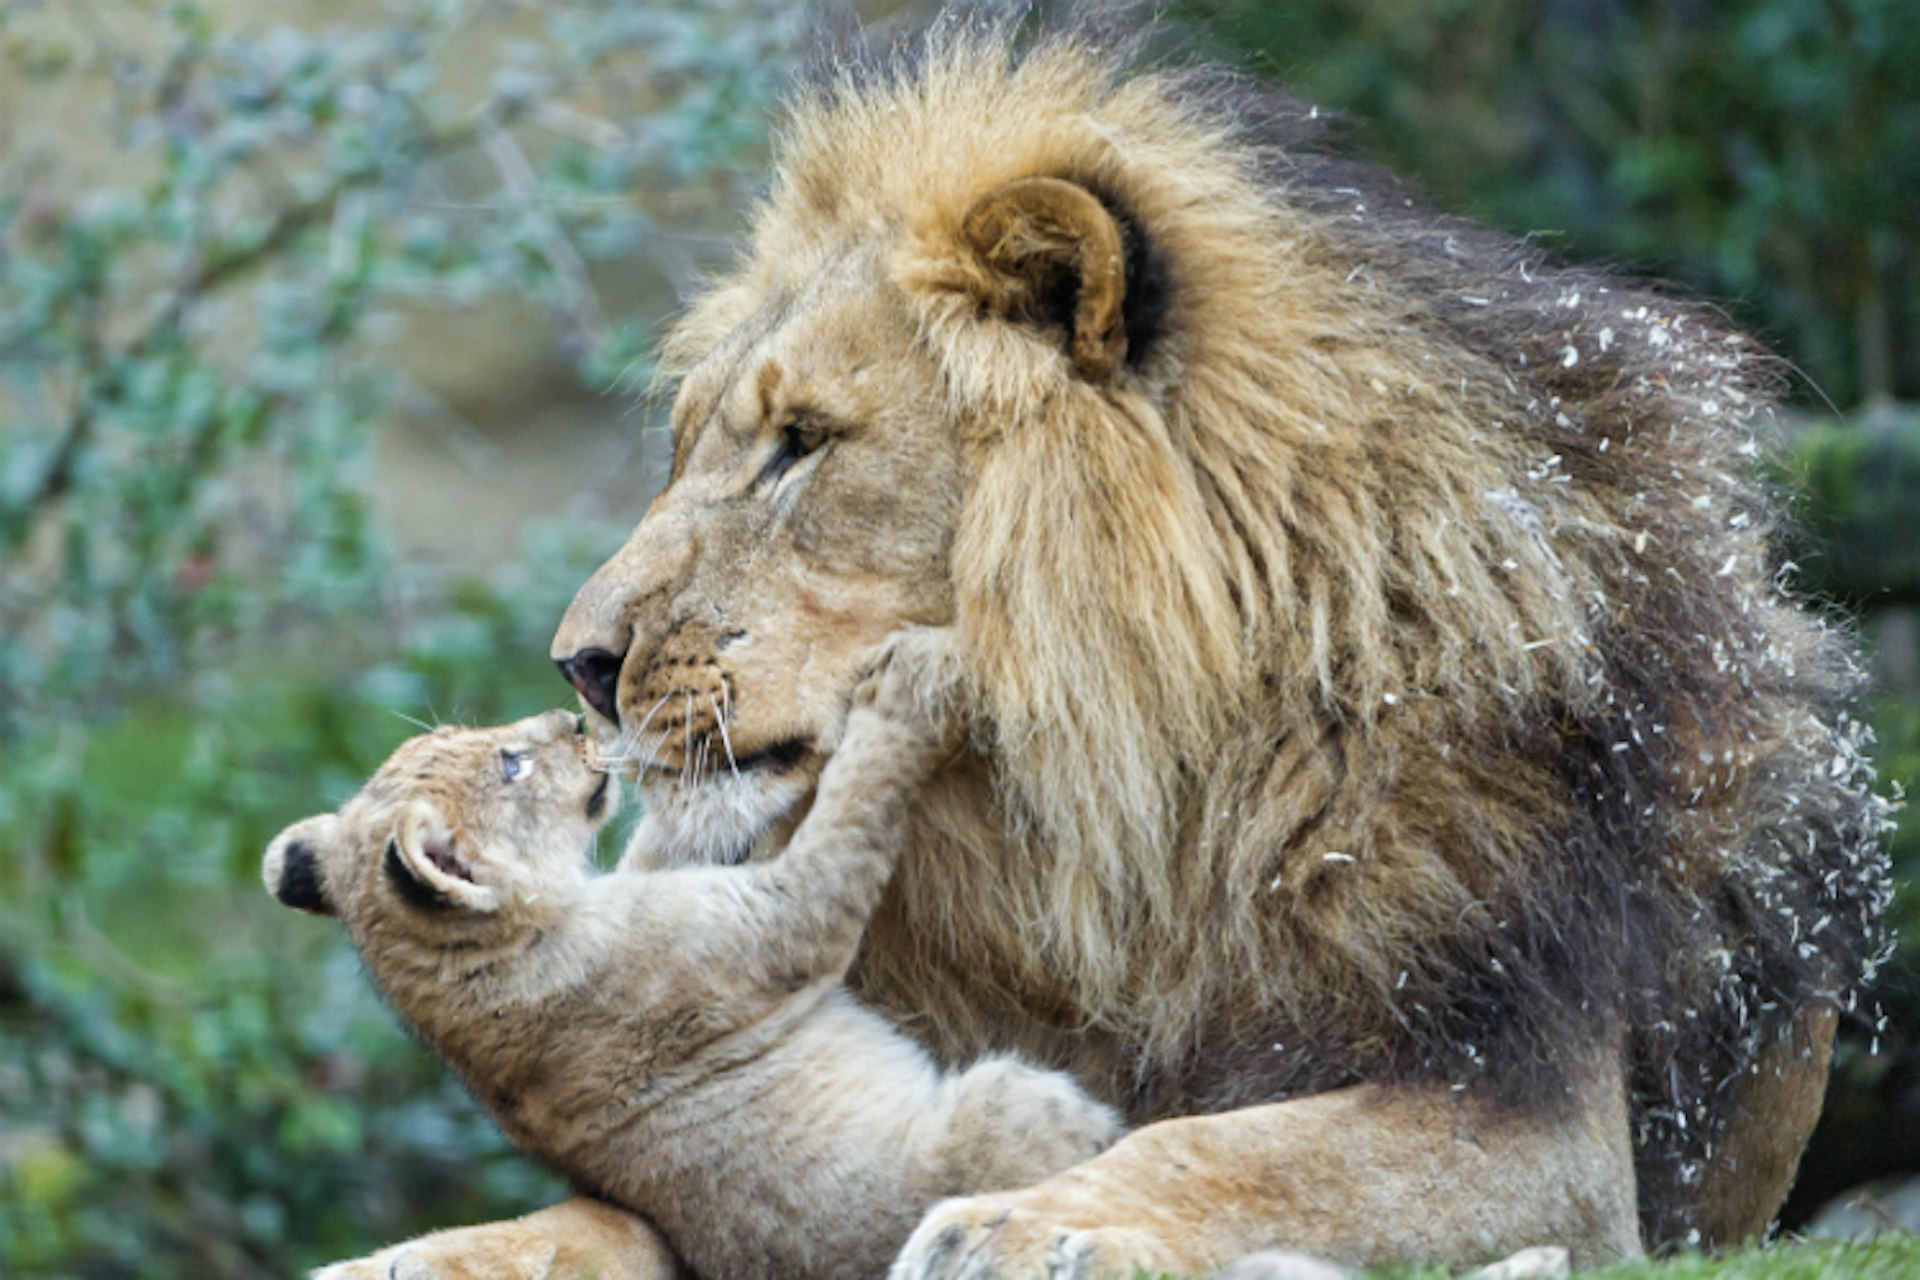 Aww, baby lions! Cute! But remember that dad might not be best pleased by your presence. Image by Tambako the Jaguar / Moment / Getty Images